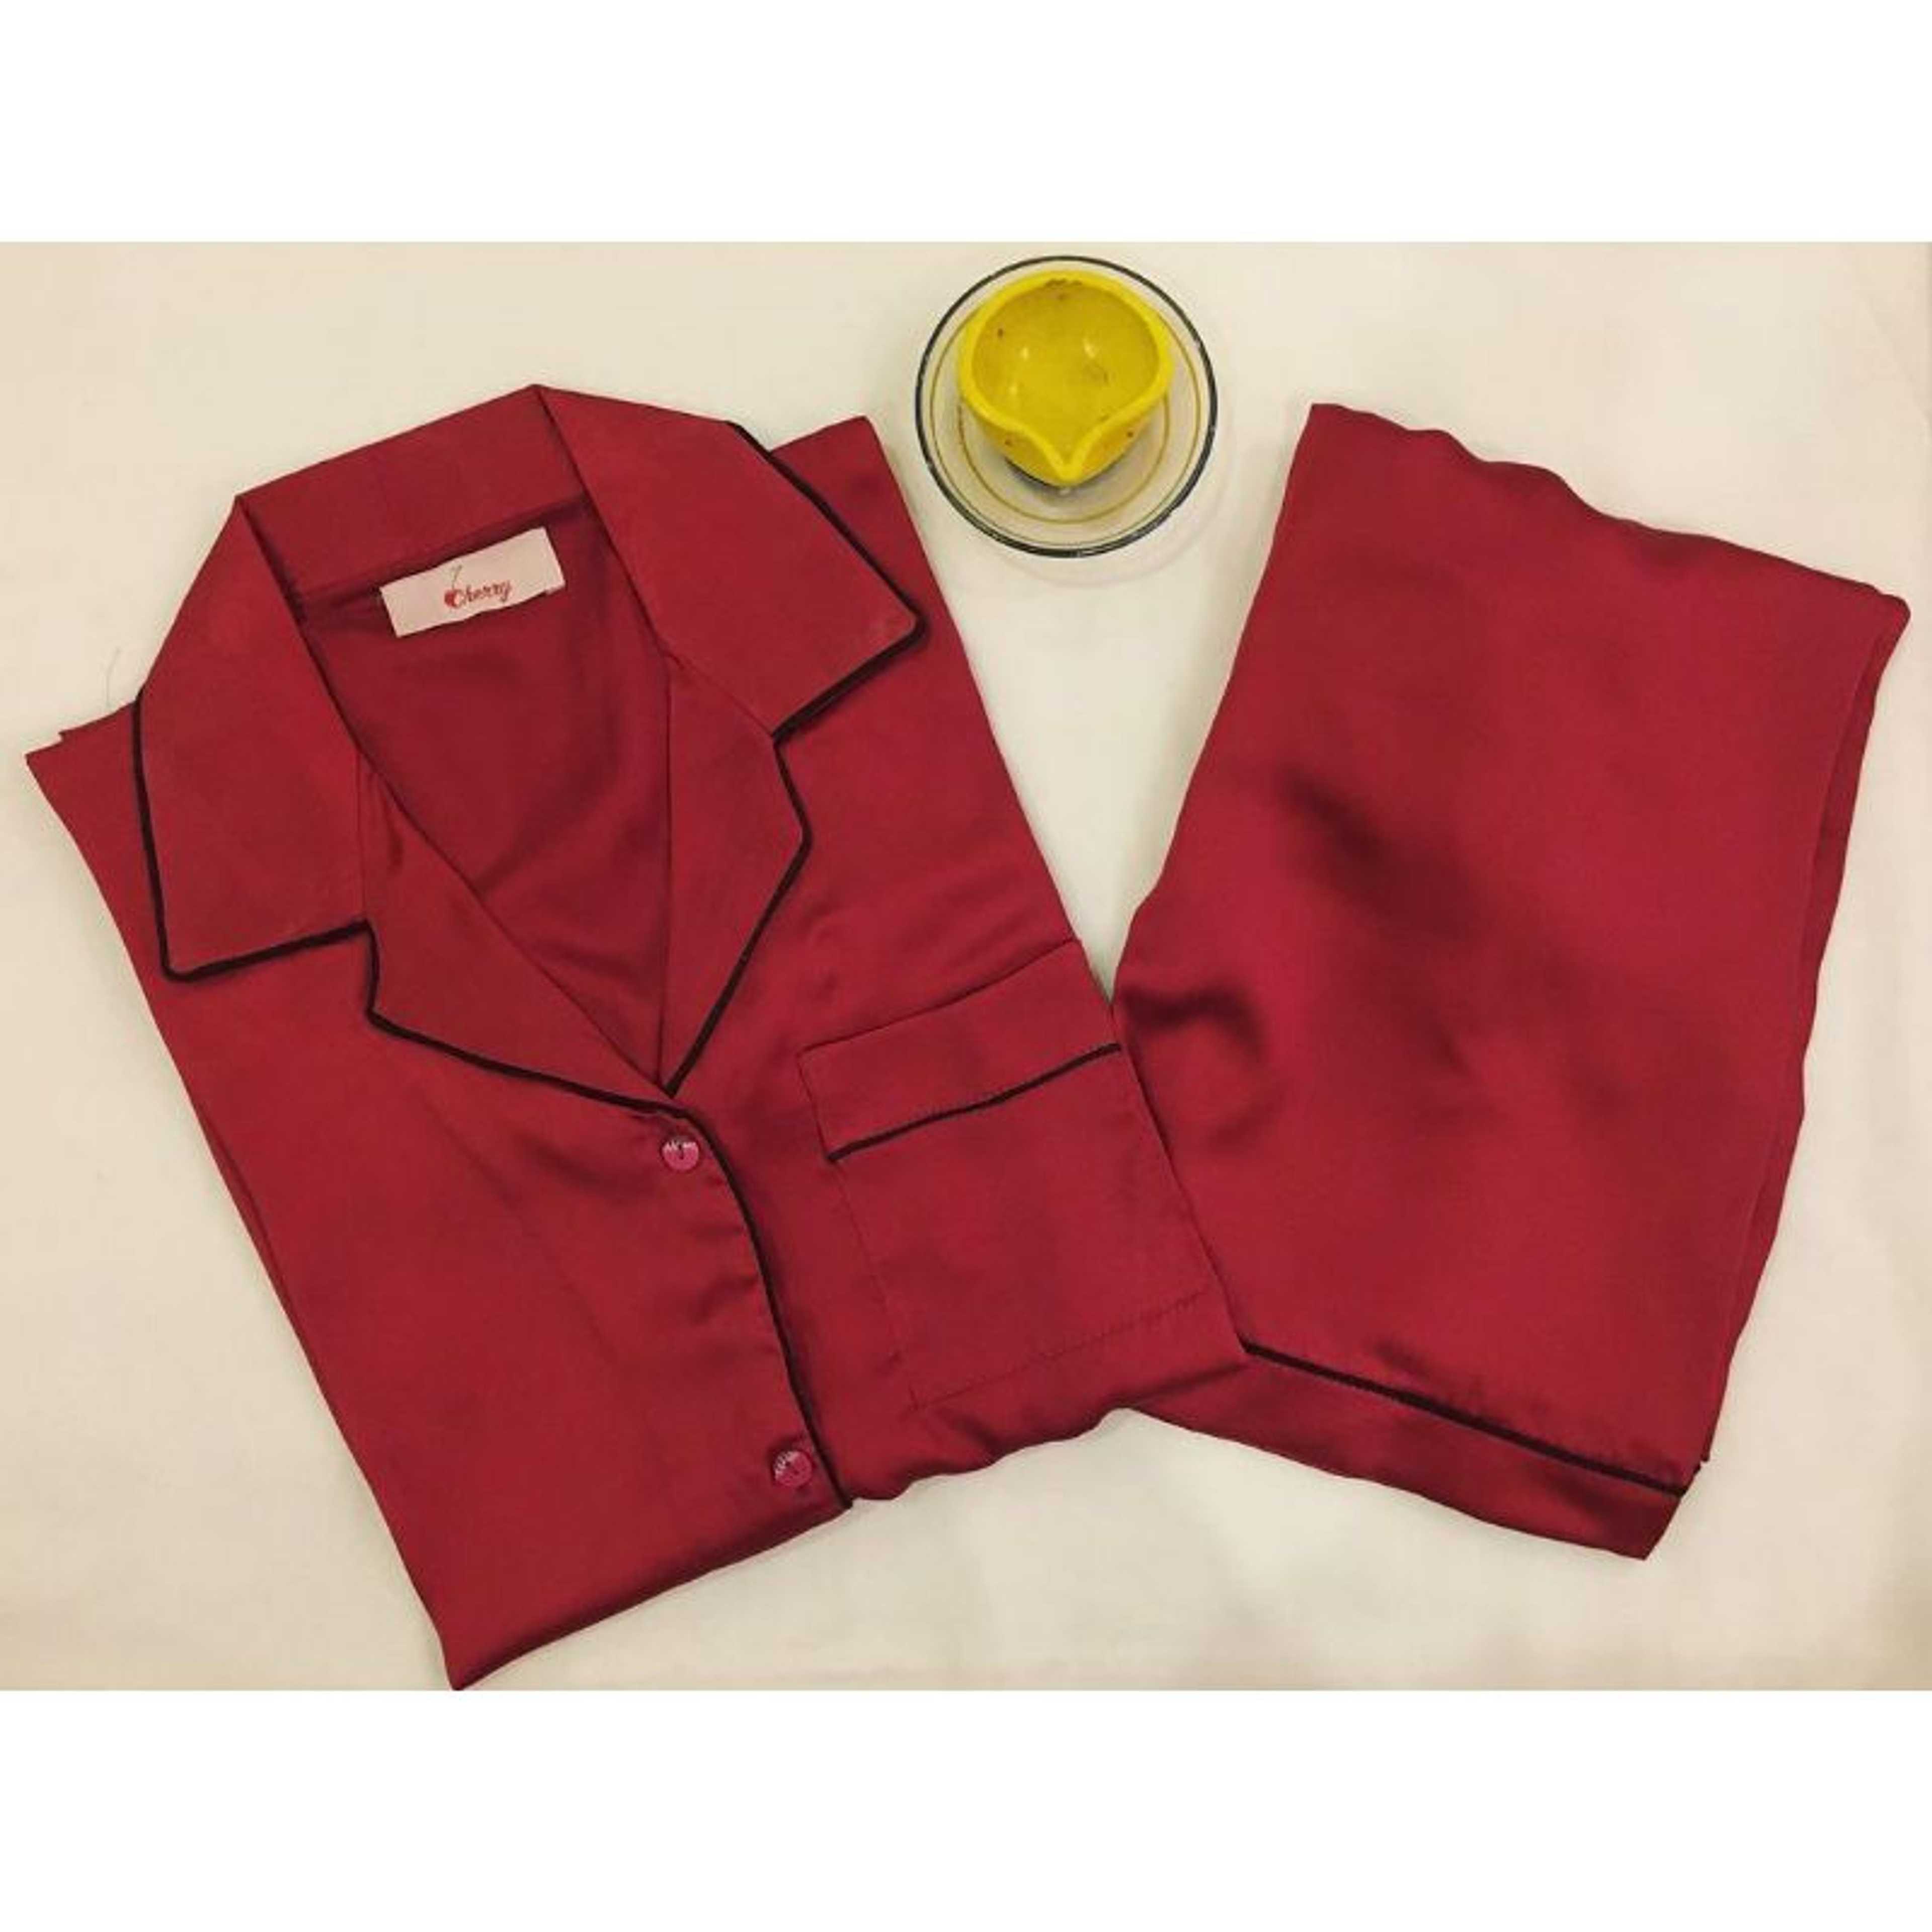 Maroon  Collared shirt and pjs in Silk.